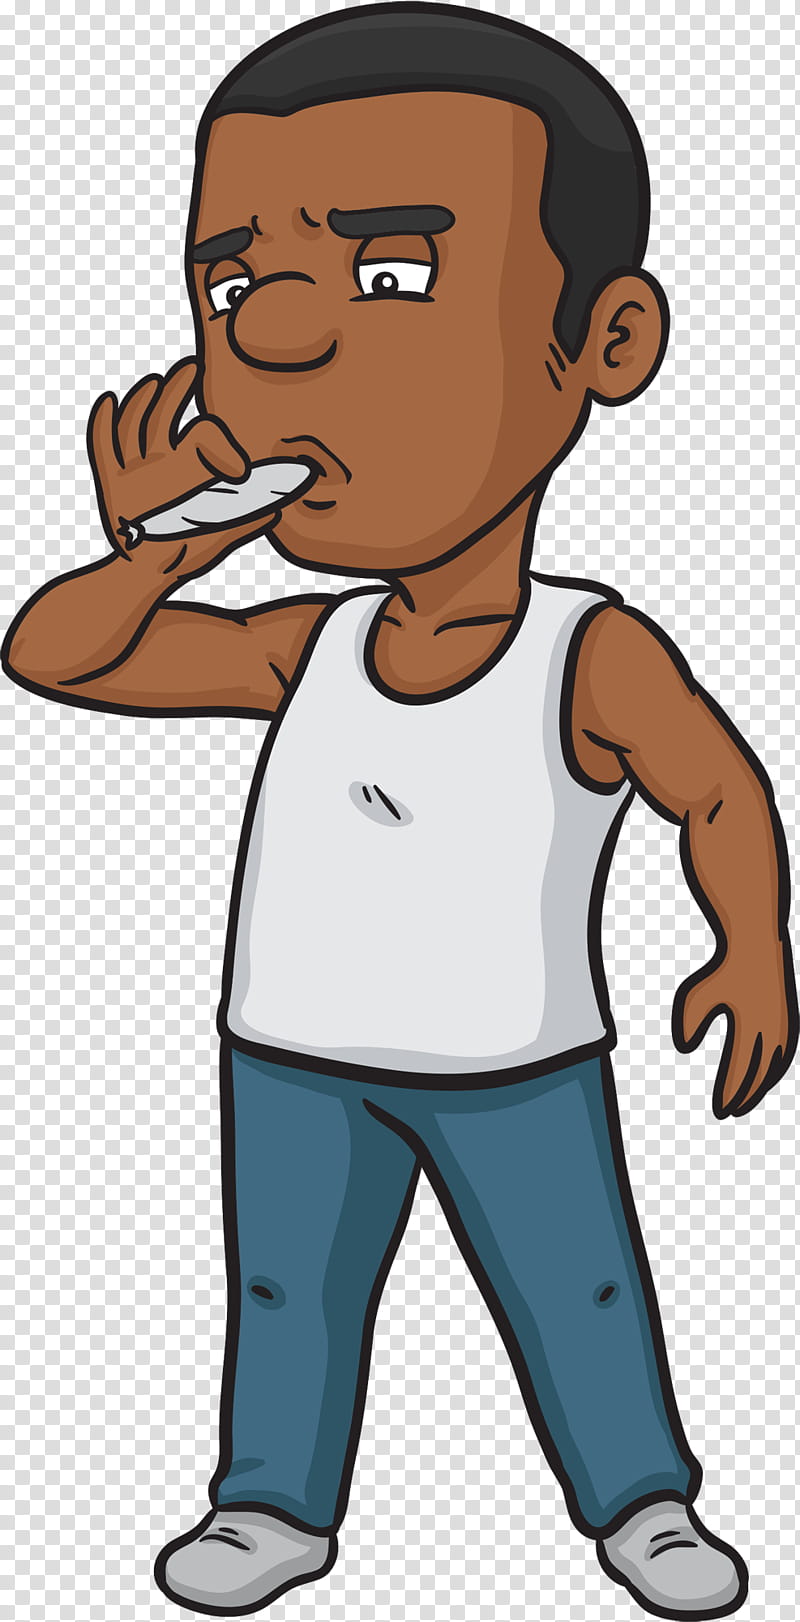 Boy, Cartoon, Drawing, Male, Cannabis, Smoking, Man, Finger transparent background PNG clipart